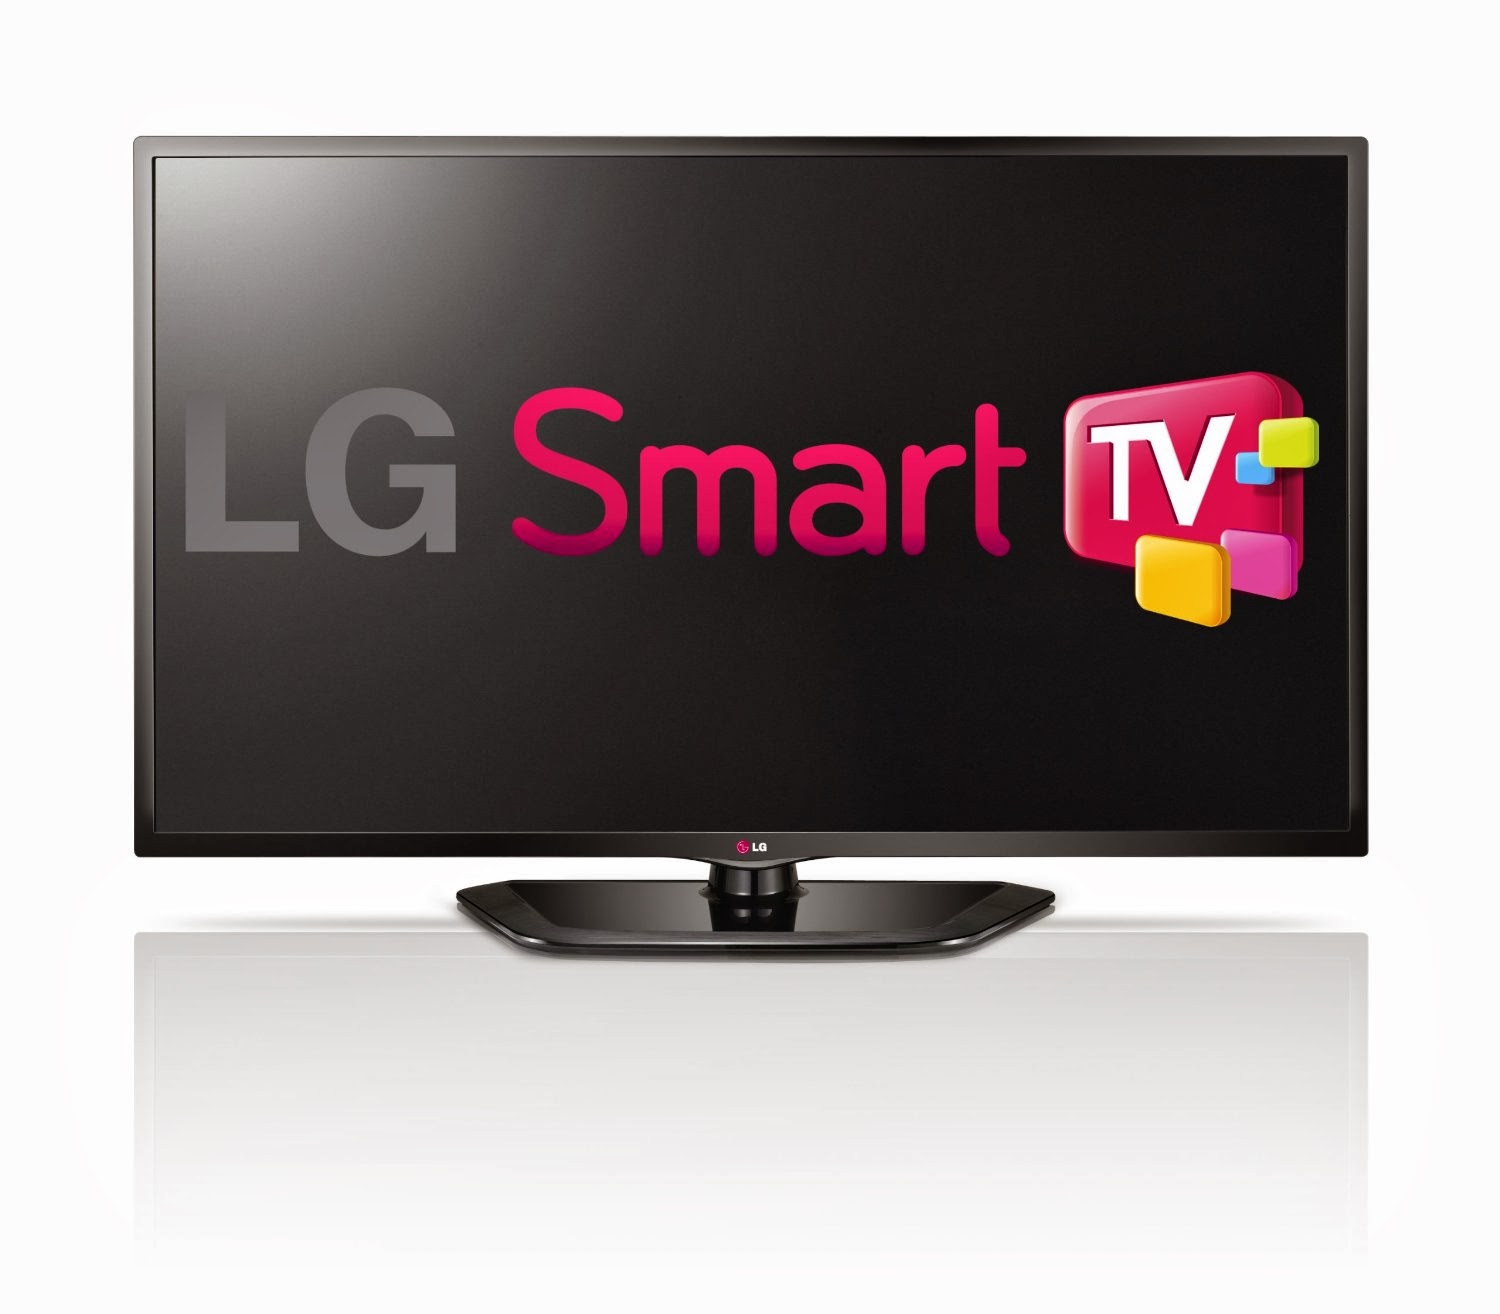 How do I connect my LG Wireless TV to my Wi-Fi?